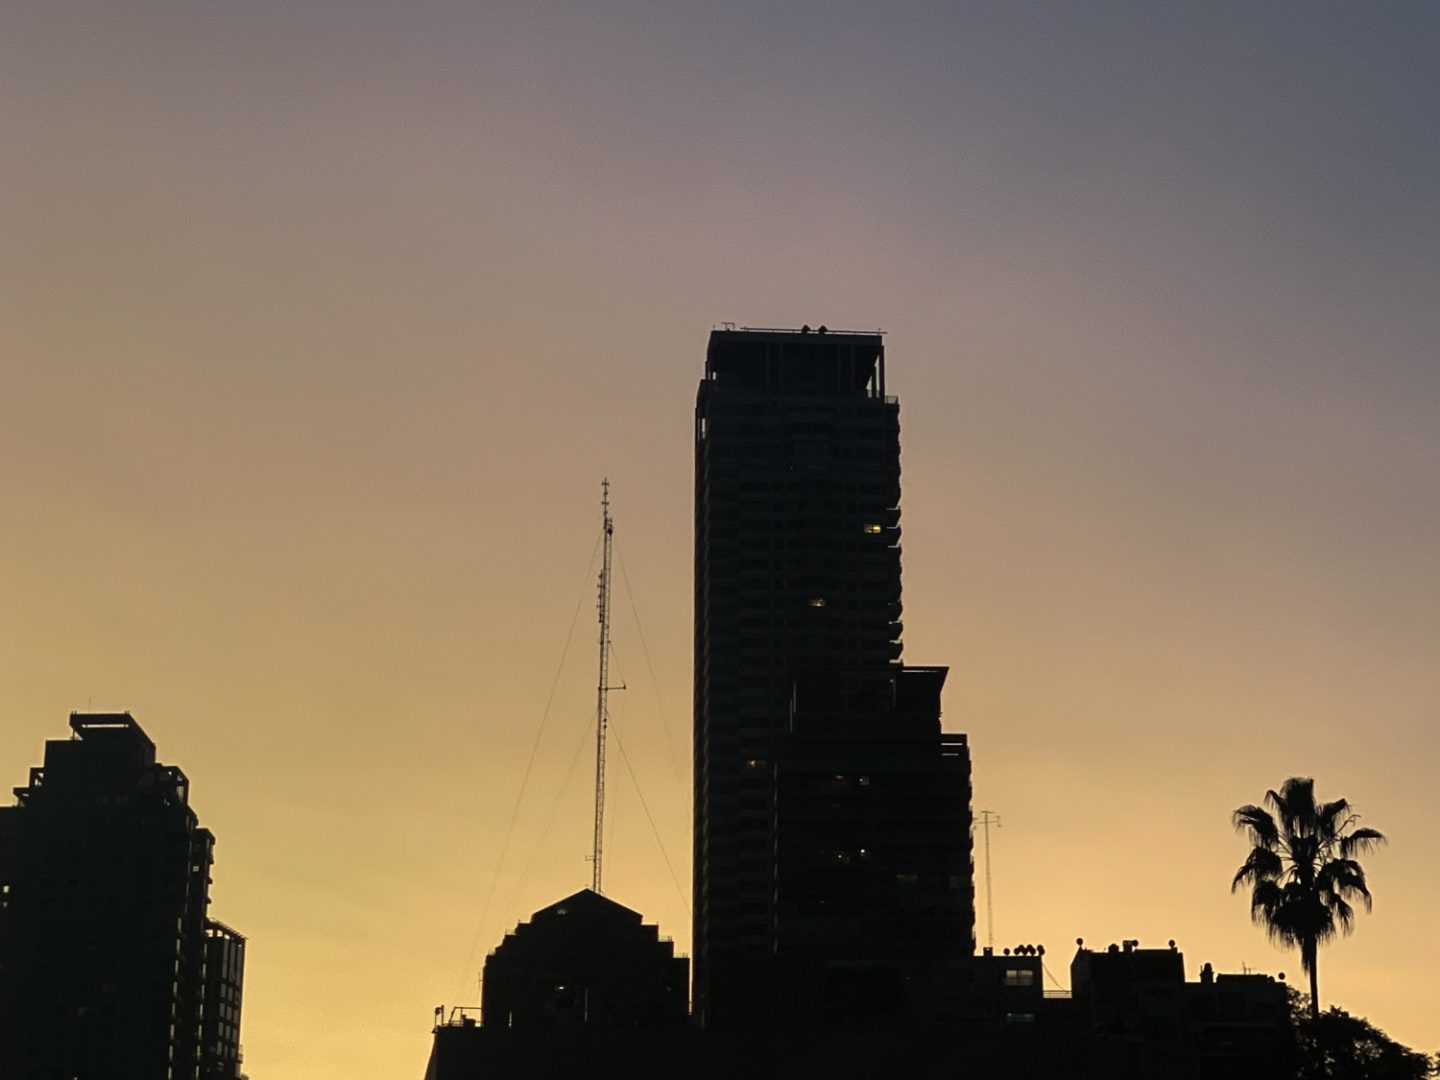 Buenos Aires skyline at sunset